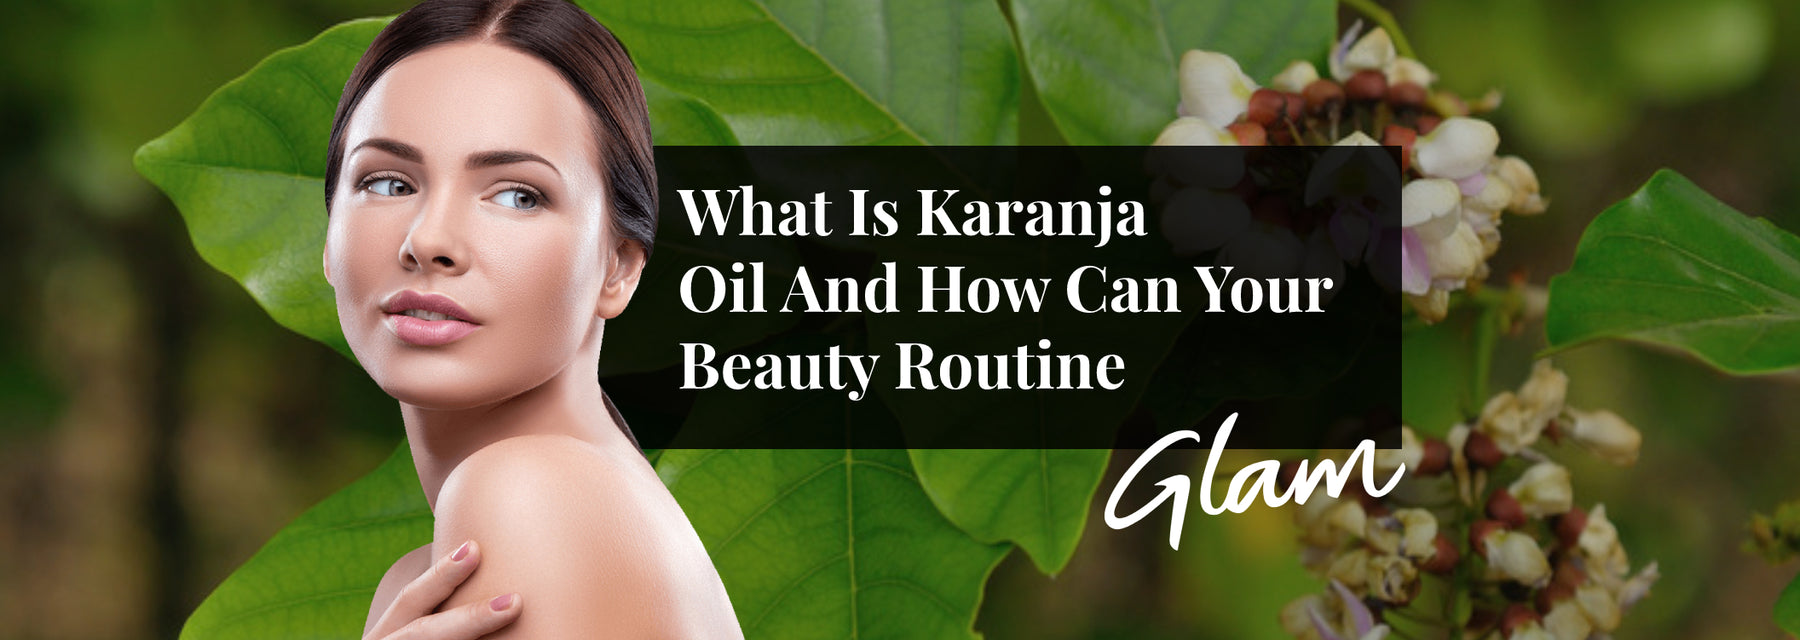 What Is Karanja Oil And How Can Your Beauty Routine Benefit From It?